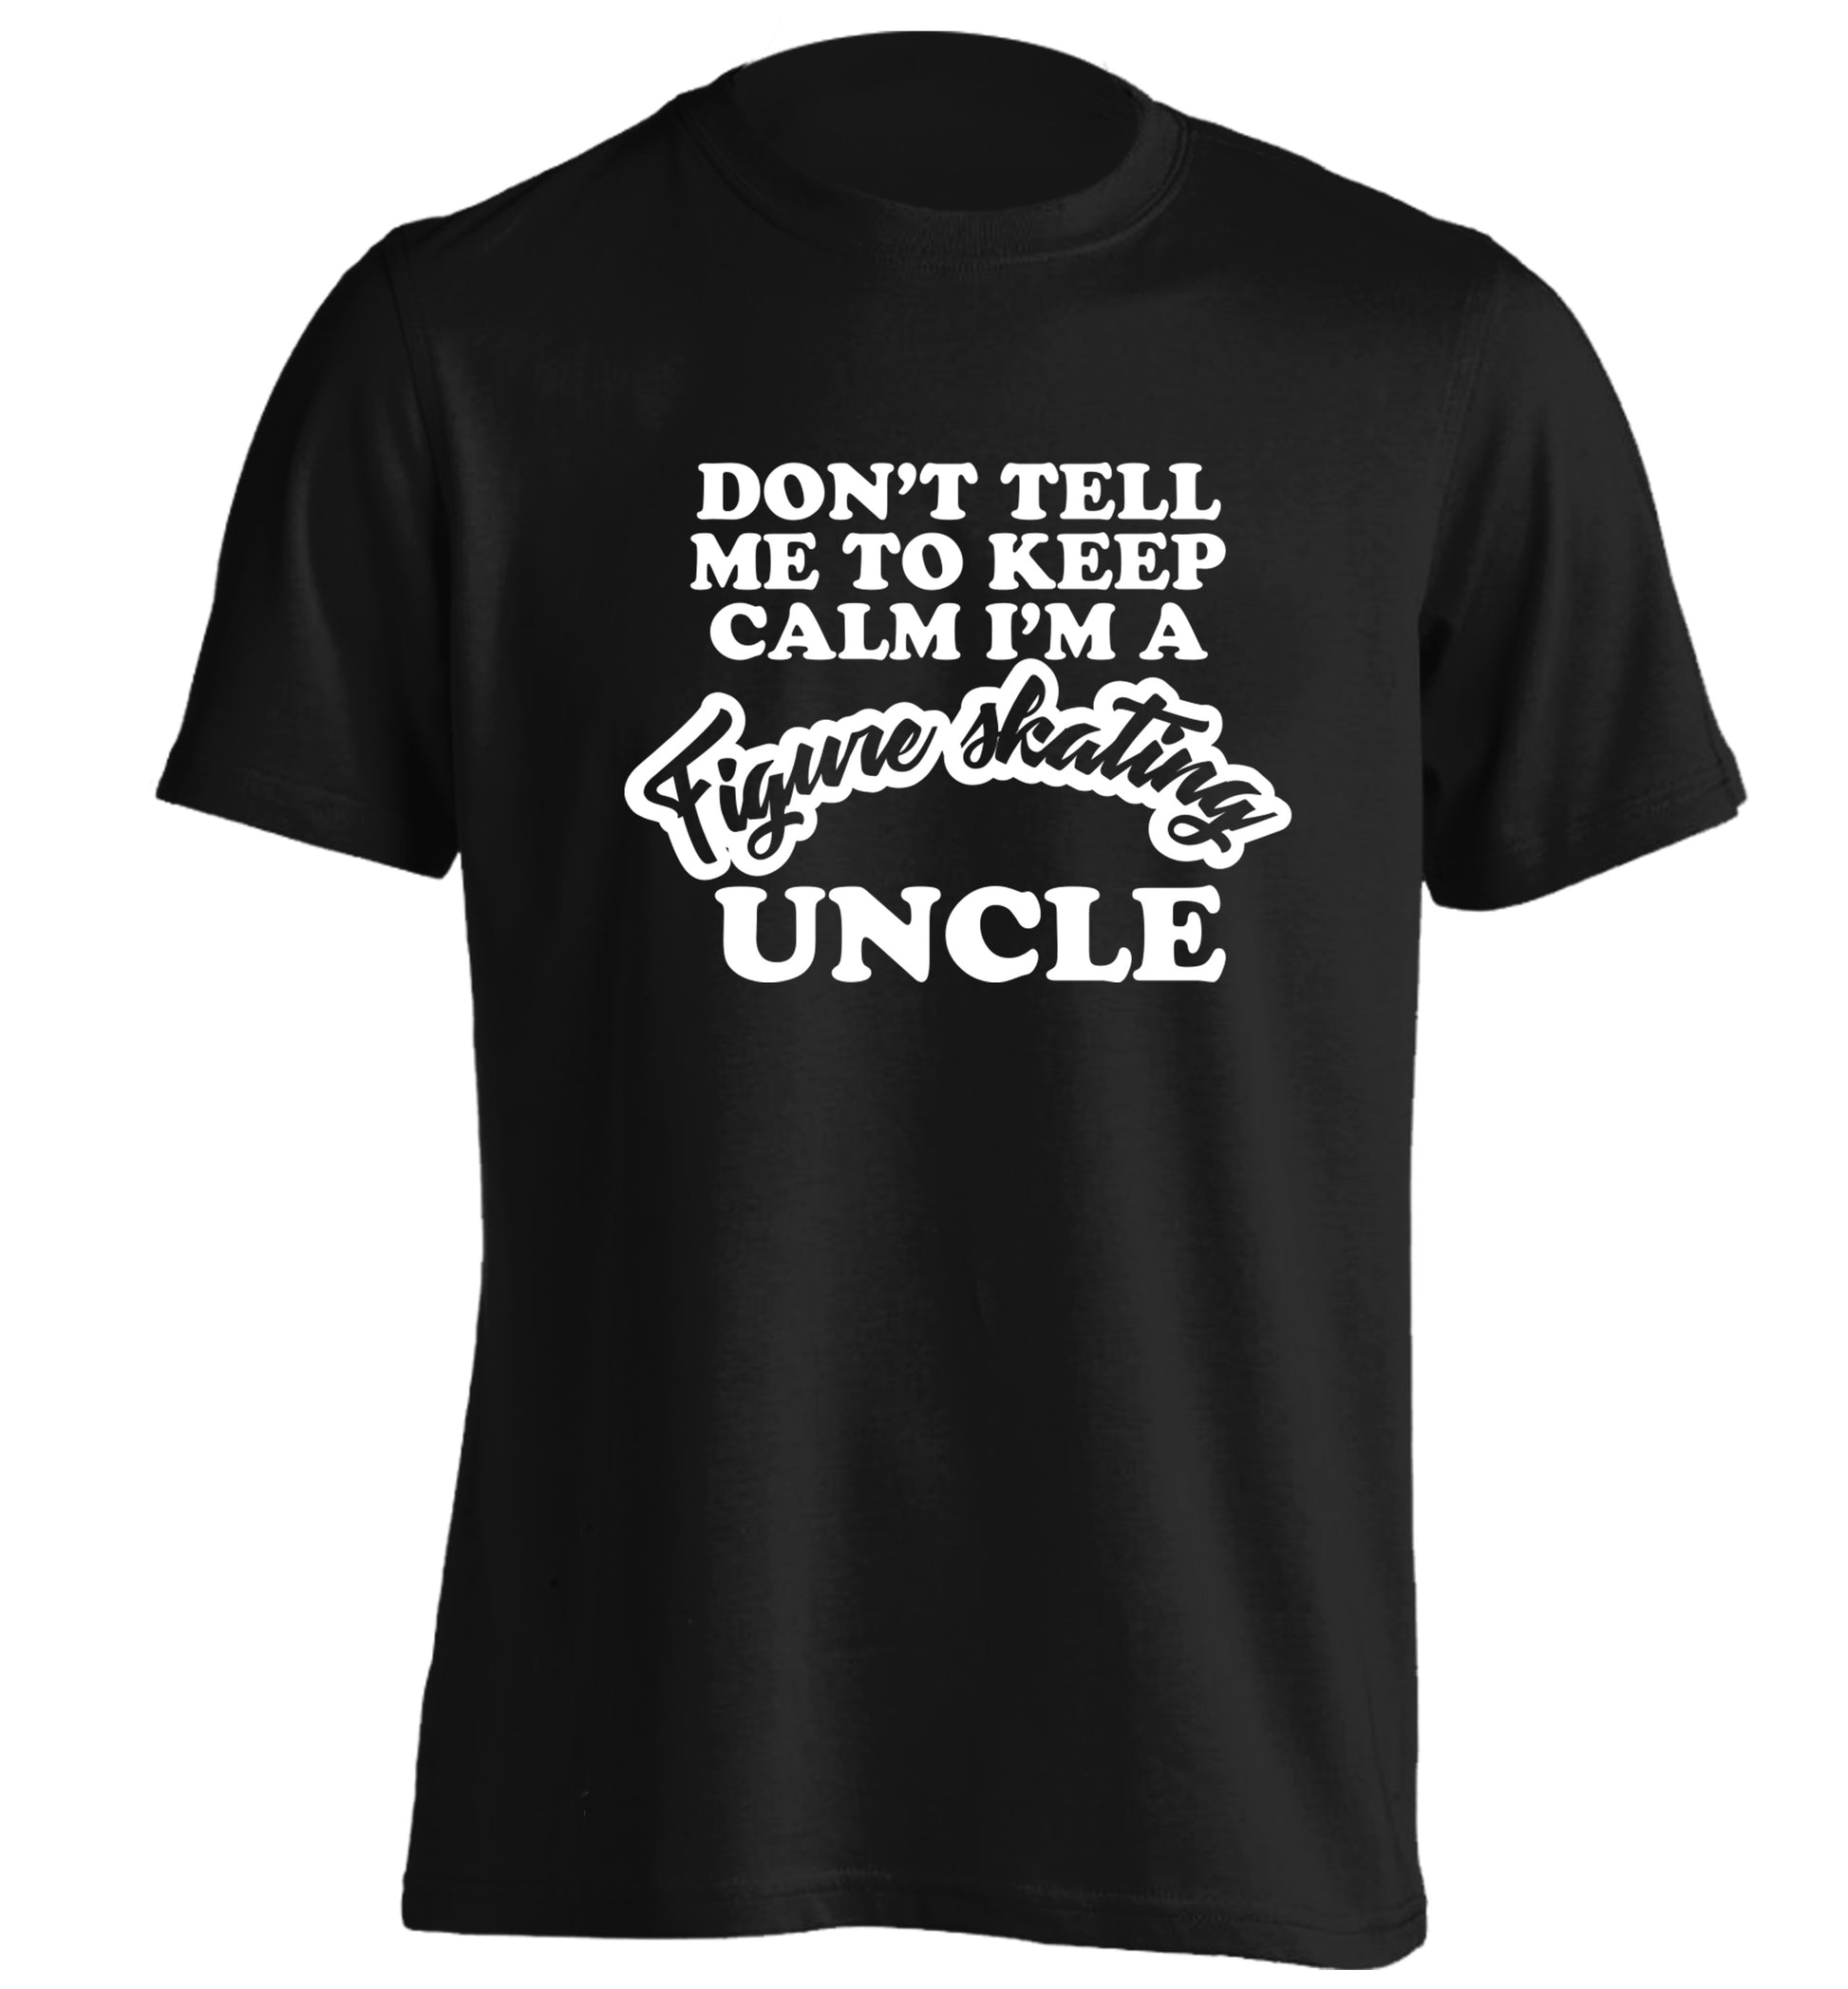 Don't tell me to keep calm I'm a figure skating uncle adults unisexblack Tshirt 2XL